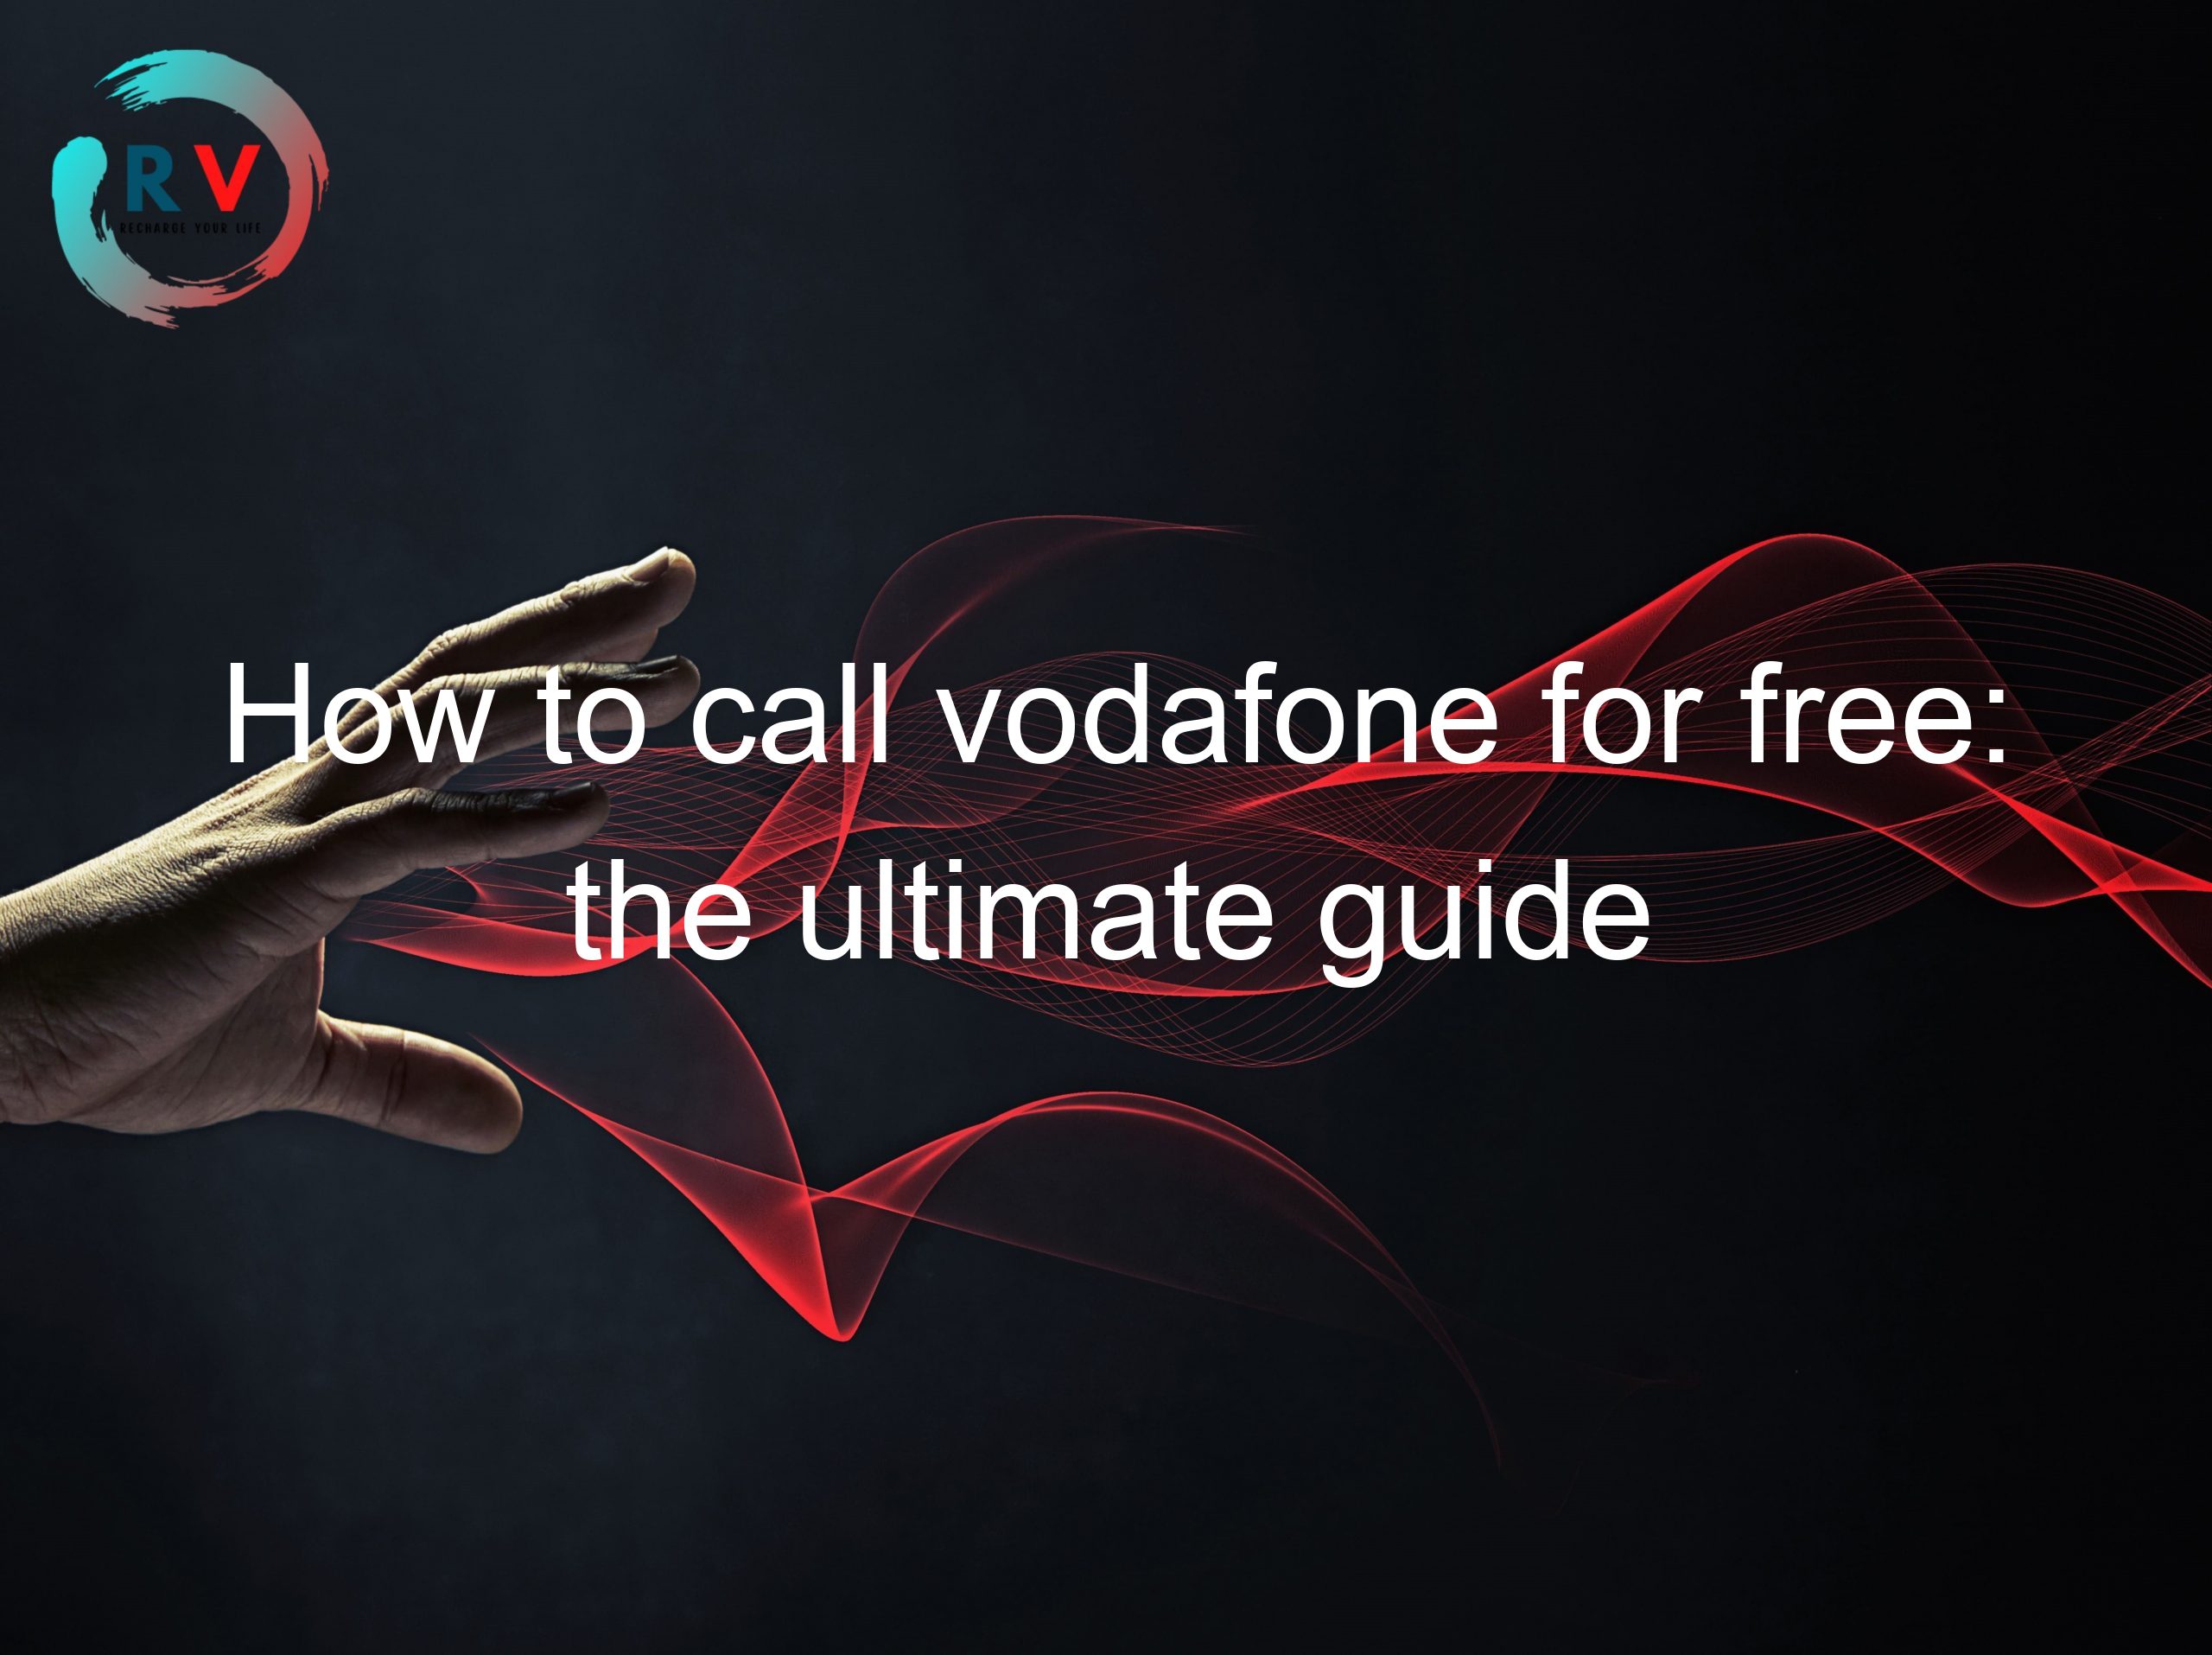 How to call vodafone for free: the ultimate guide